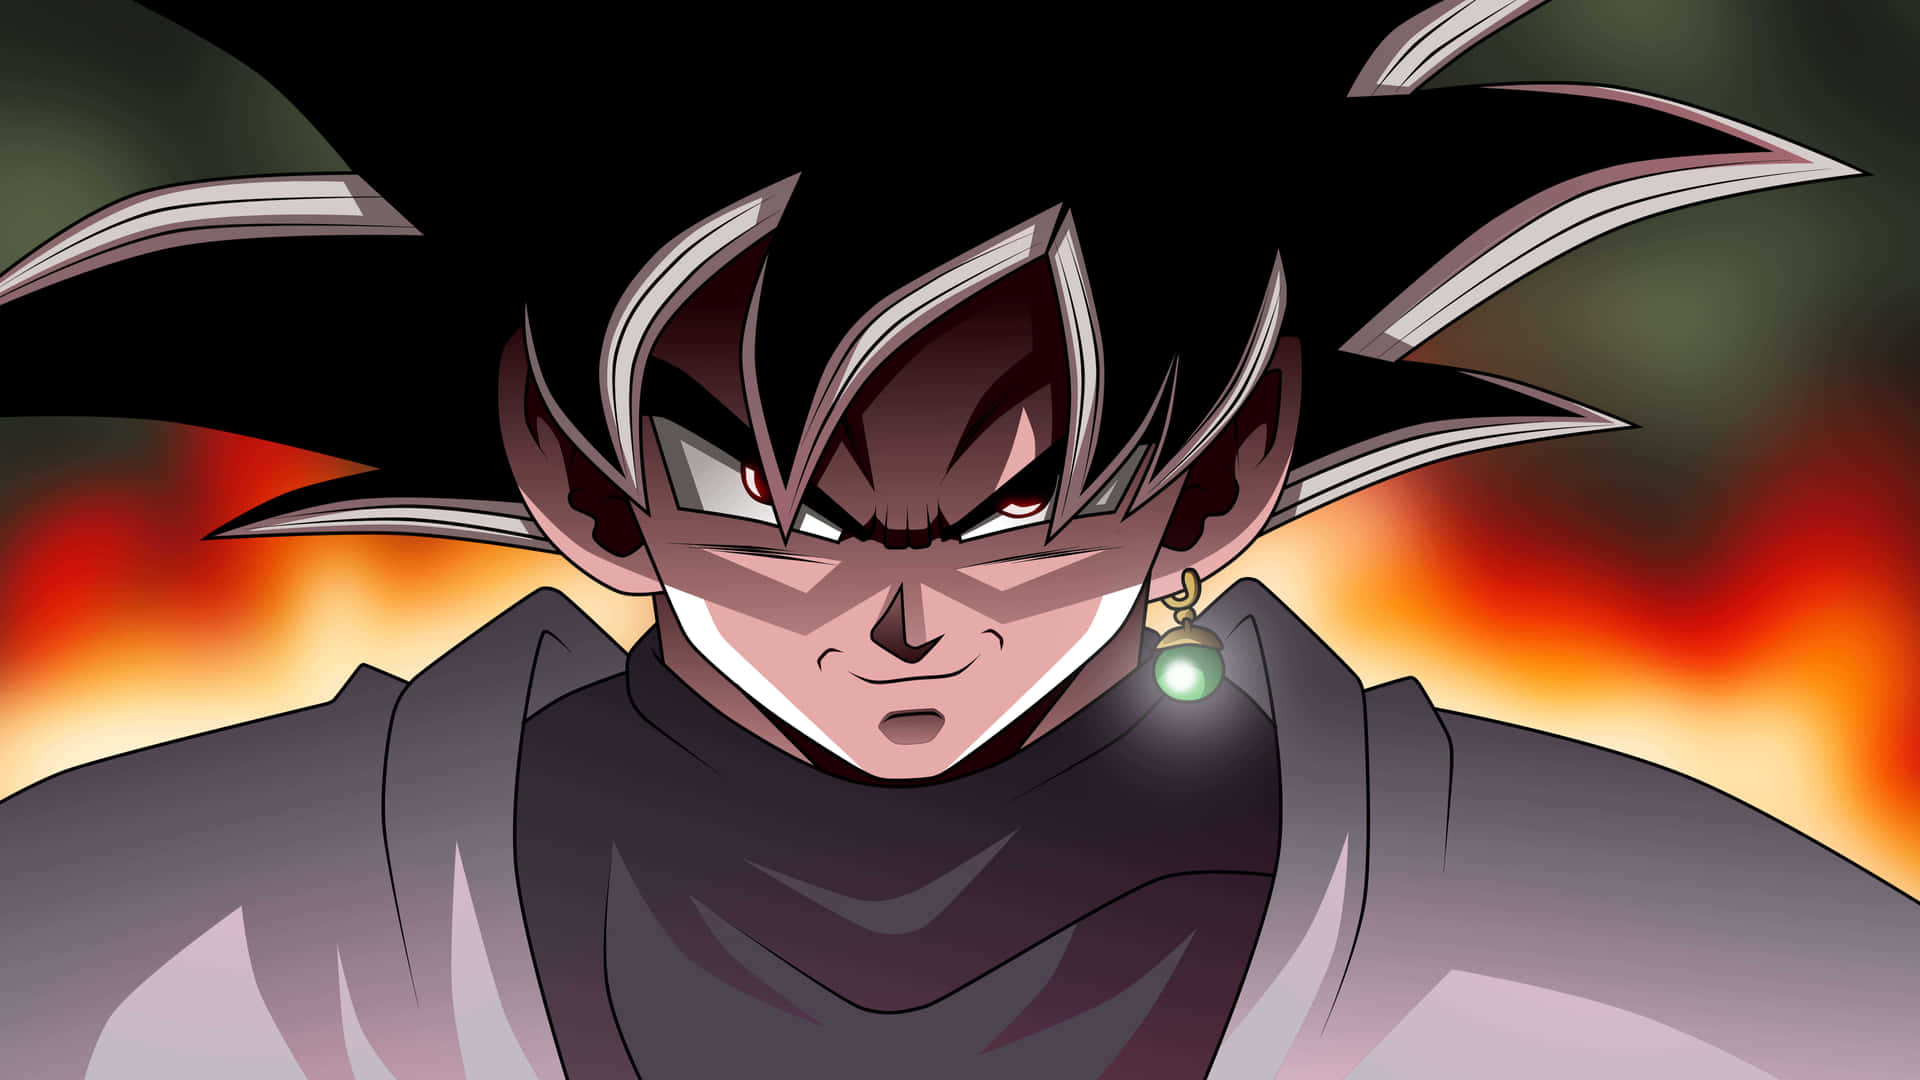 The Powerful Goku Black Is Ready To Fight! Background